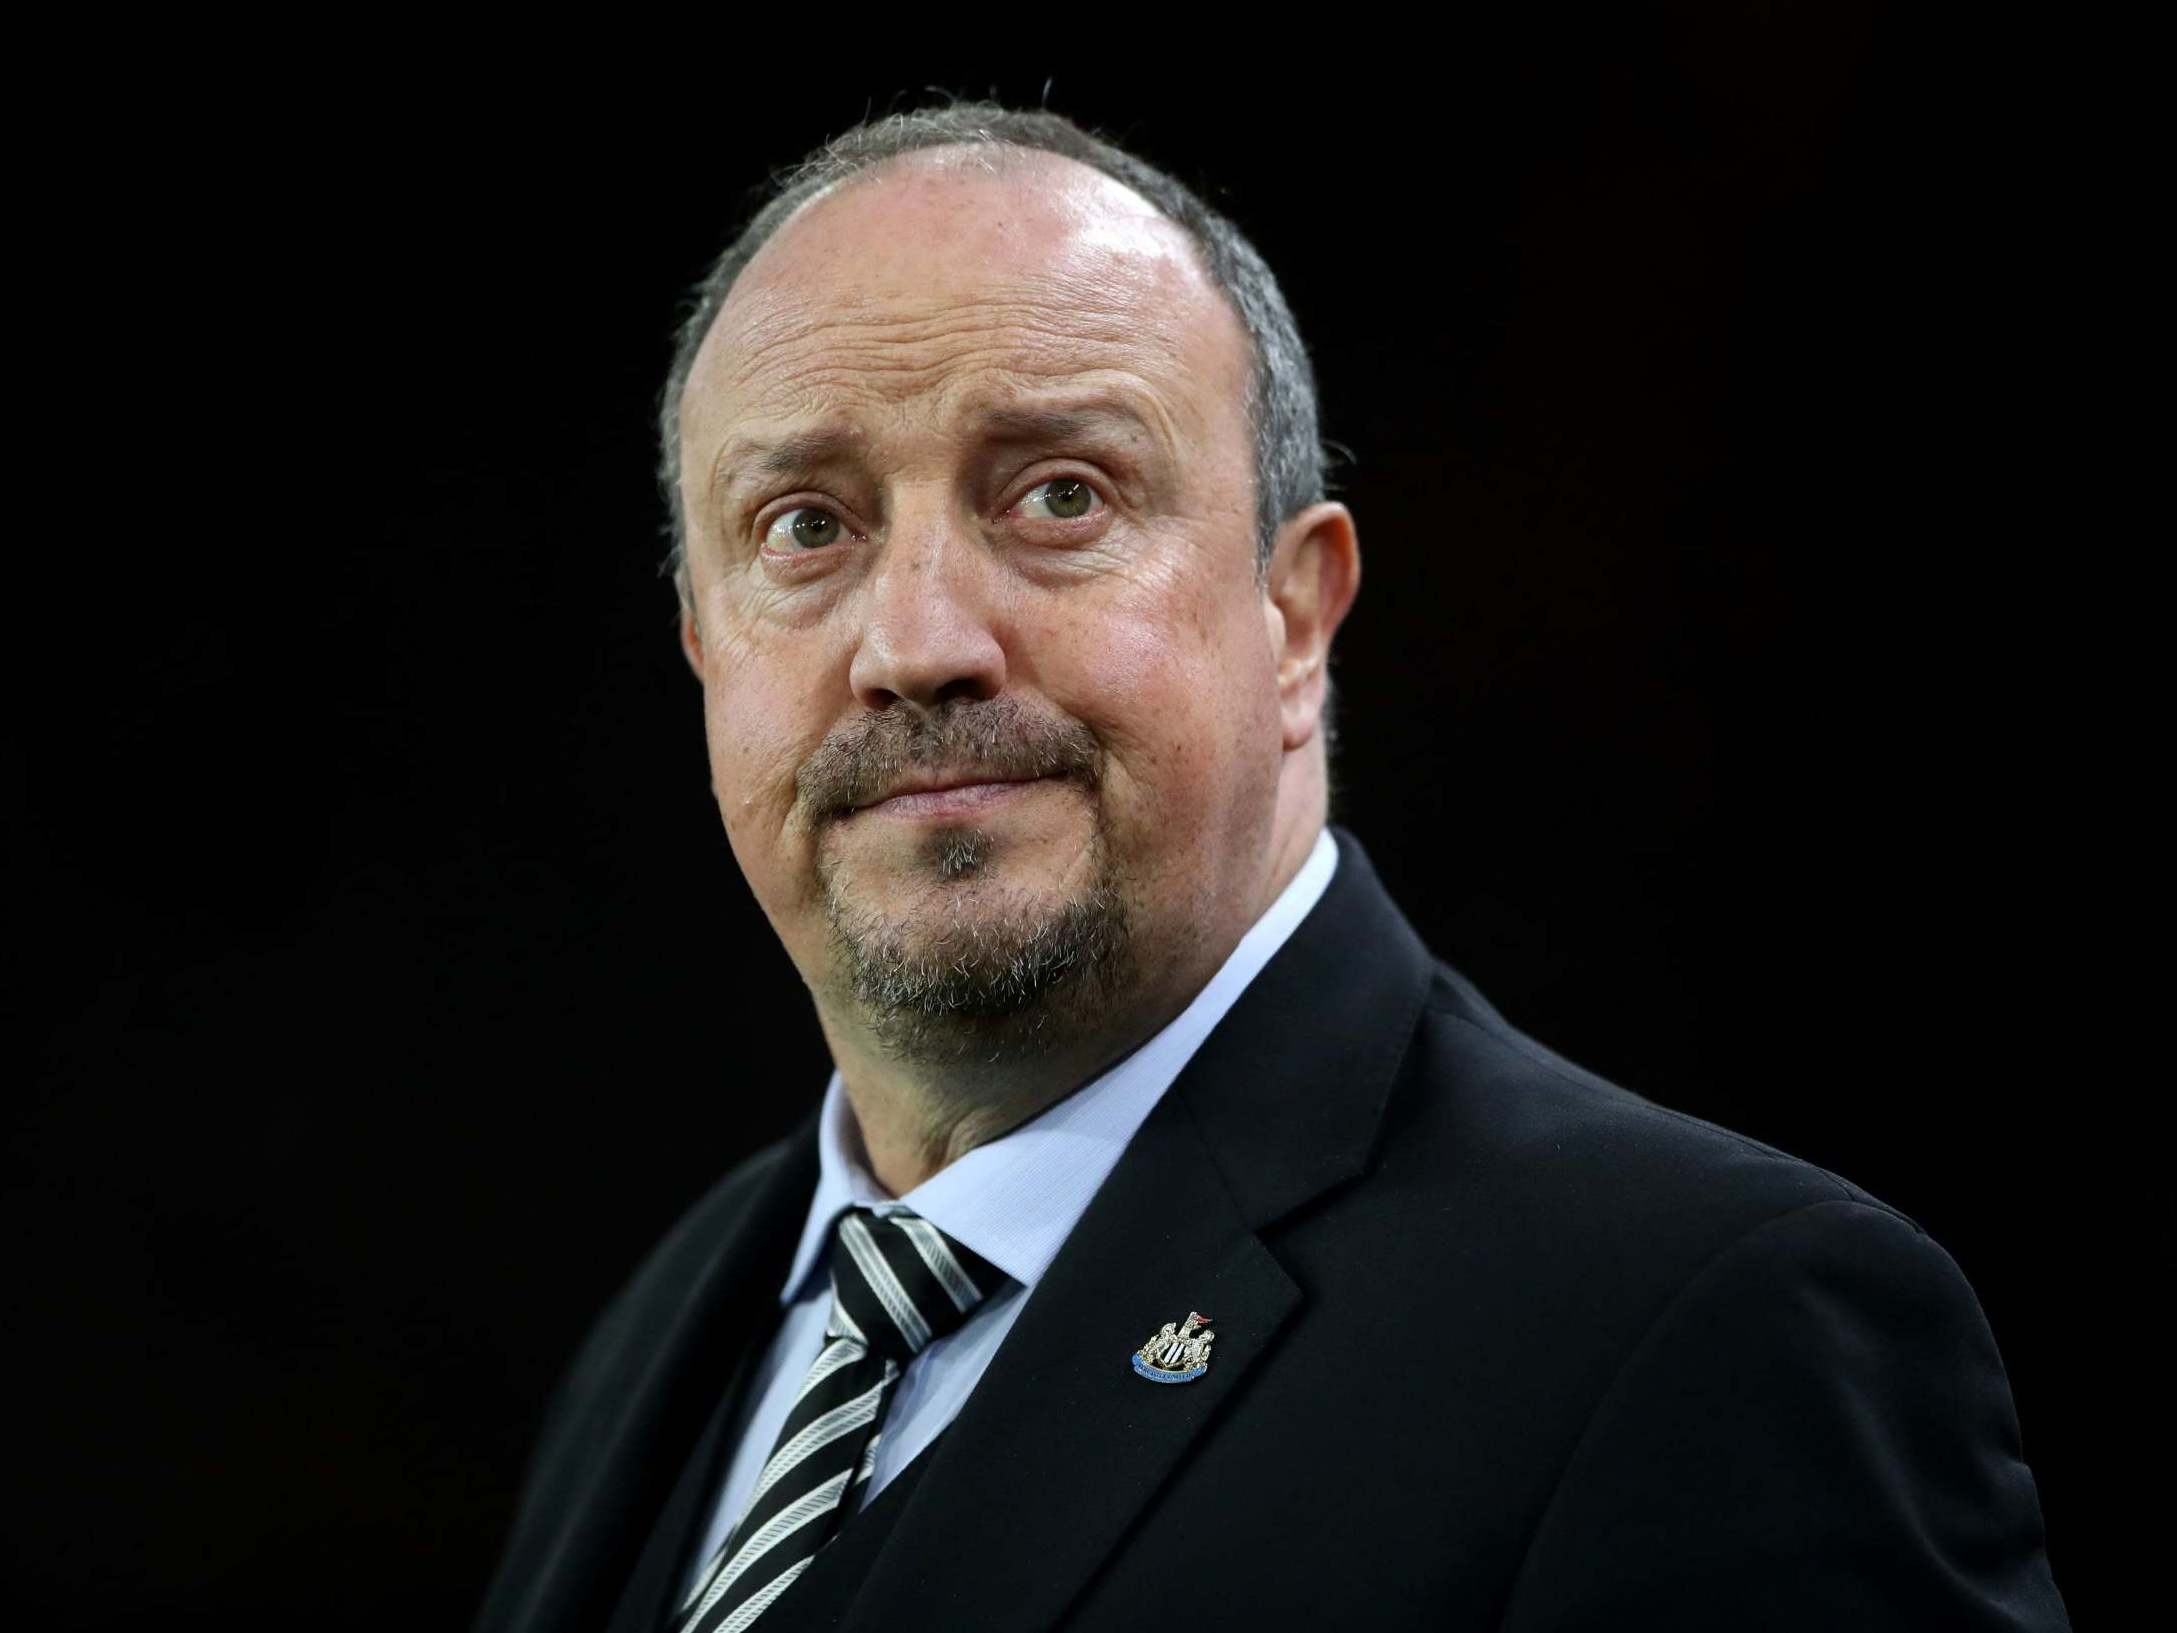 Benitez could yet take another Premier League role